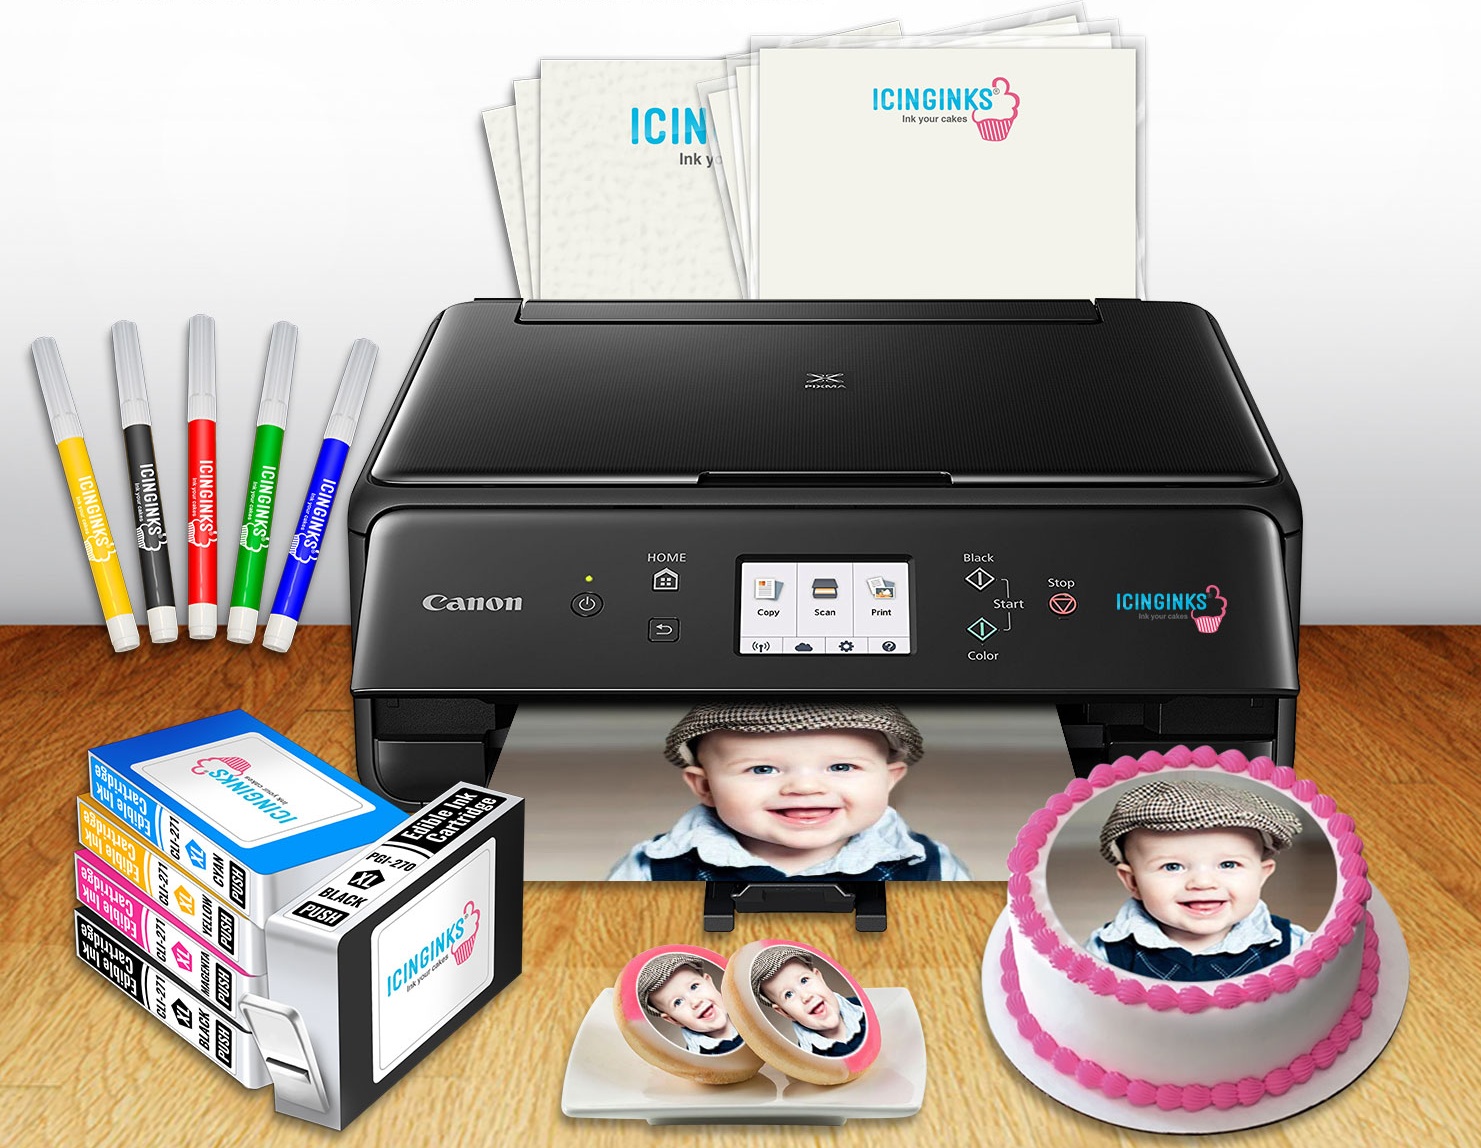 How to Use Edible Ink to Print Pictures Cake or Food